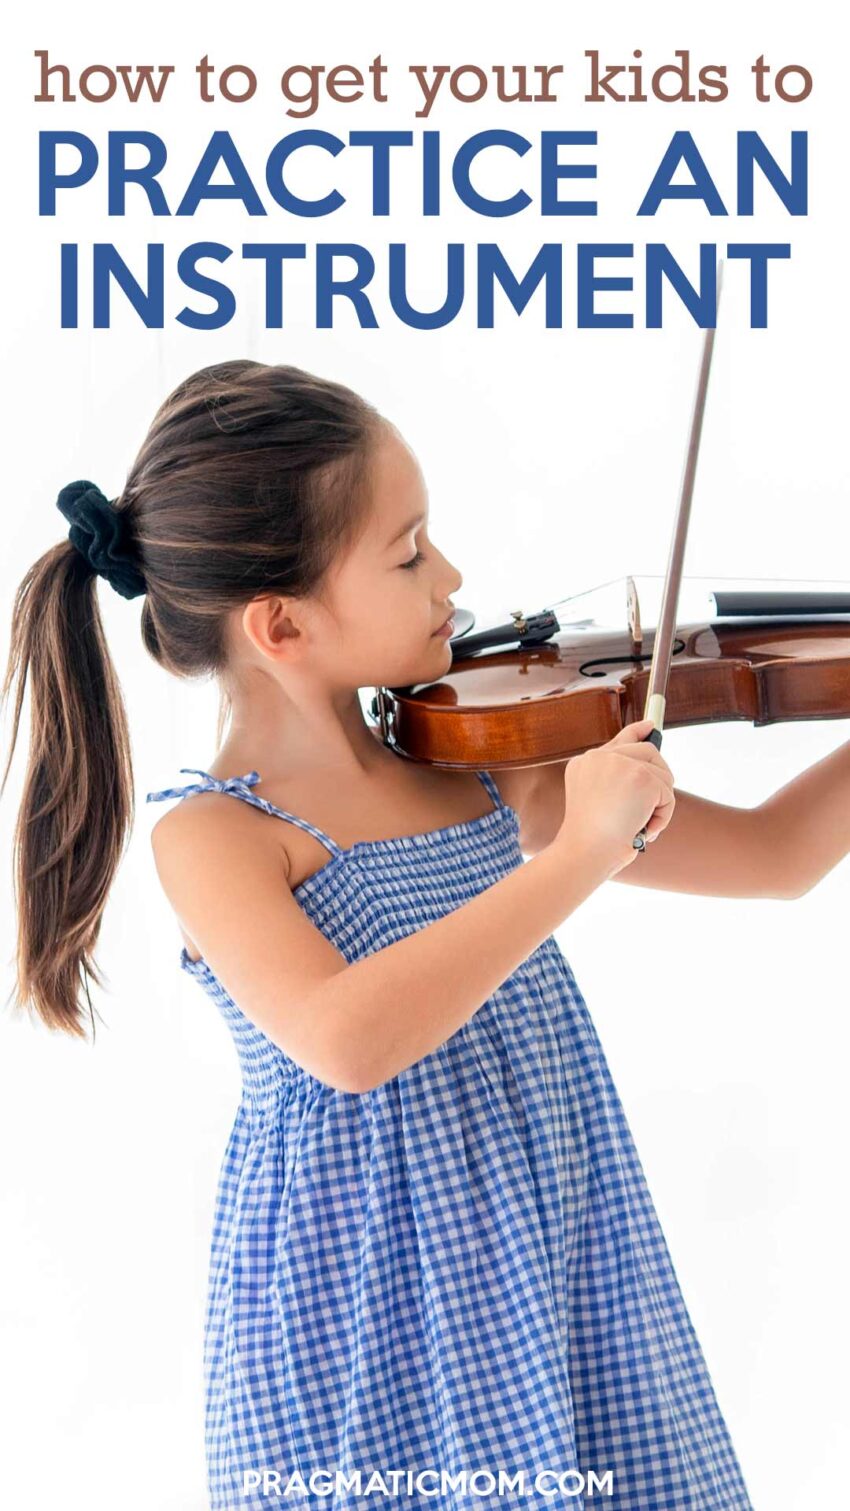 How To: Get Your Kids to Practice Their Instrument